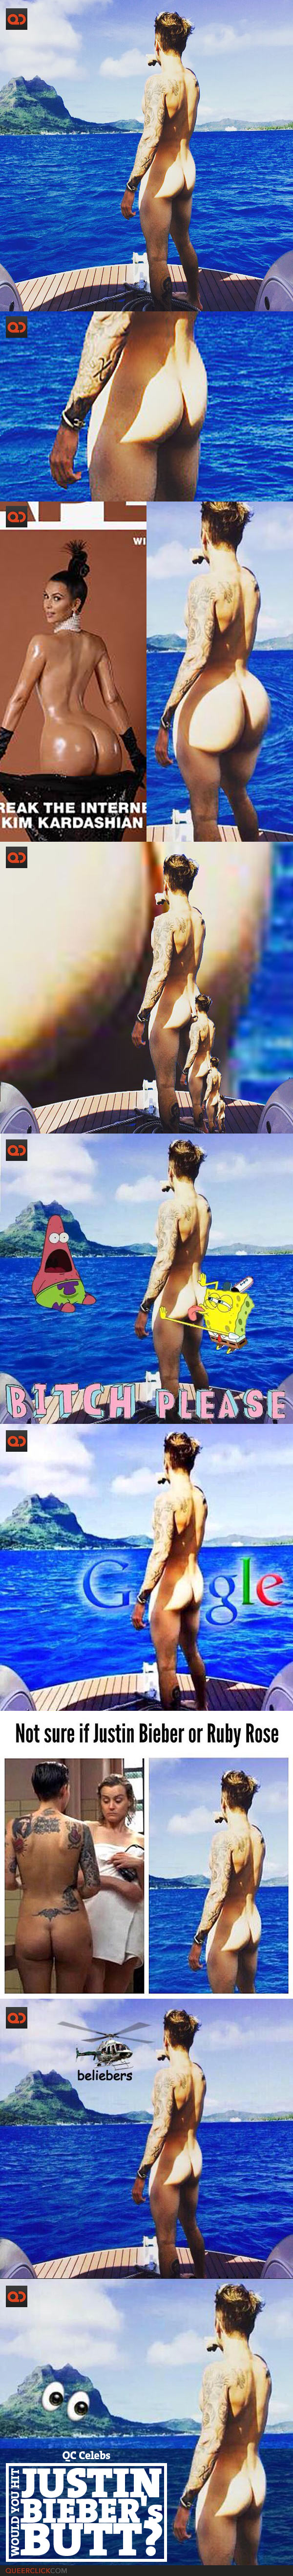 QC Celebs: Would You Hit Justin Bieber's Butt? Singer Shows Off Naked Body On Instagram